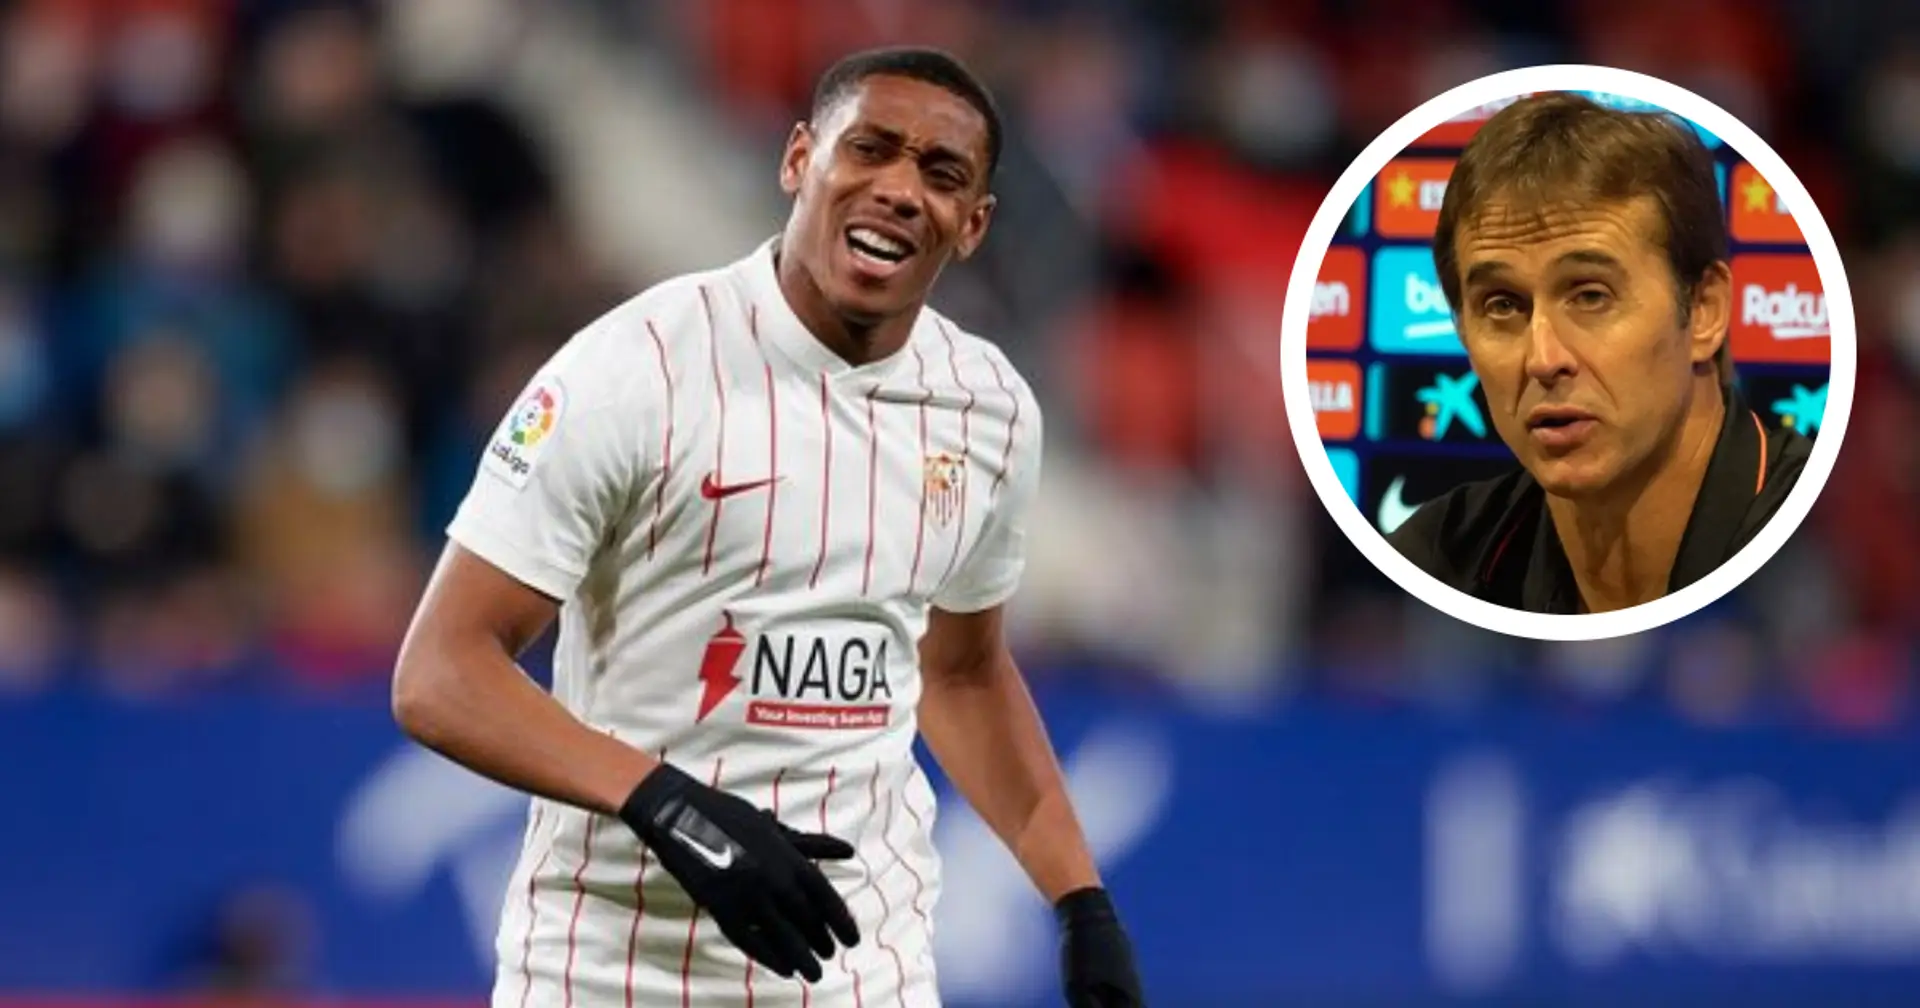 'He has to do his part': Sevilla boss Lopeteugui reacts to Martial being jeered by fans